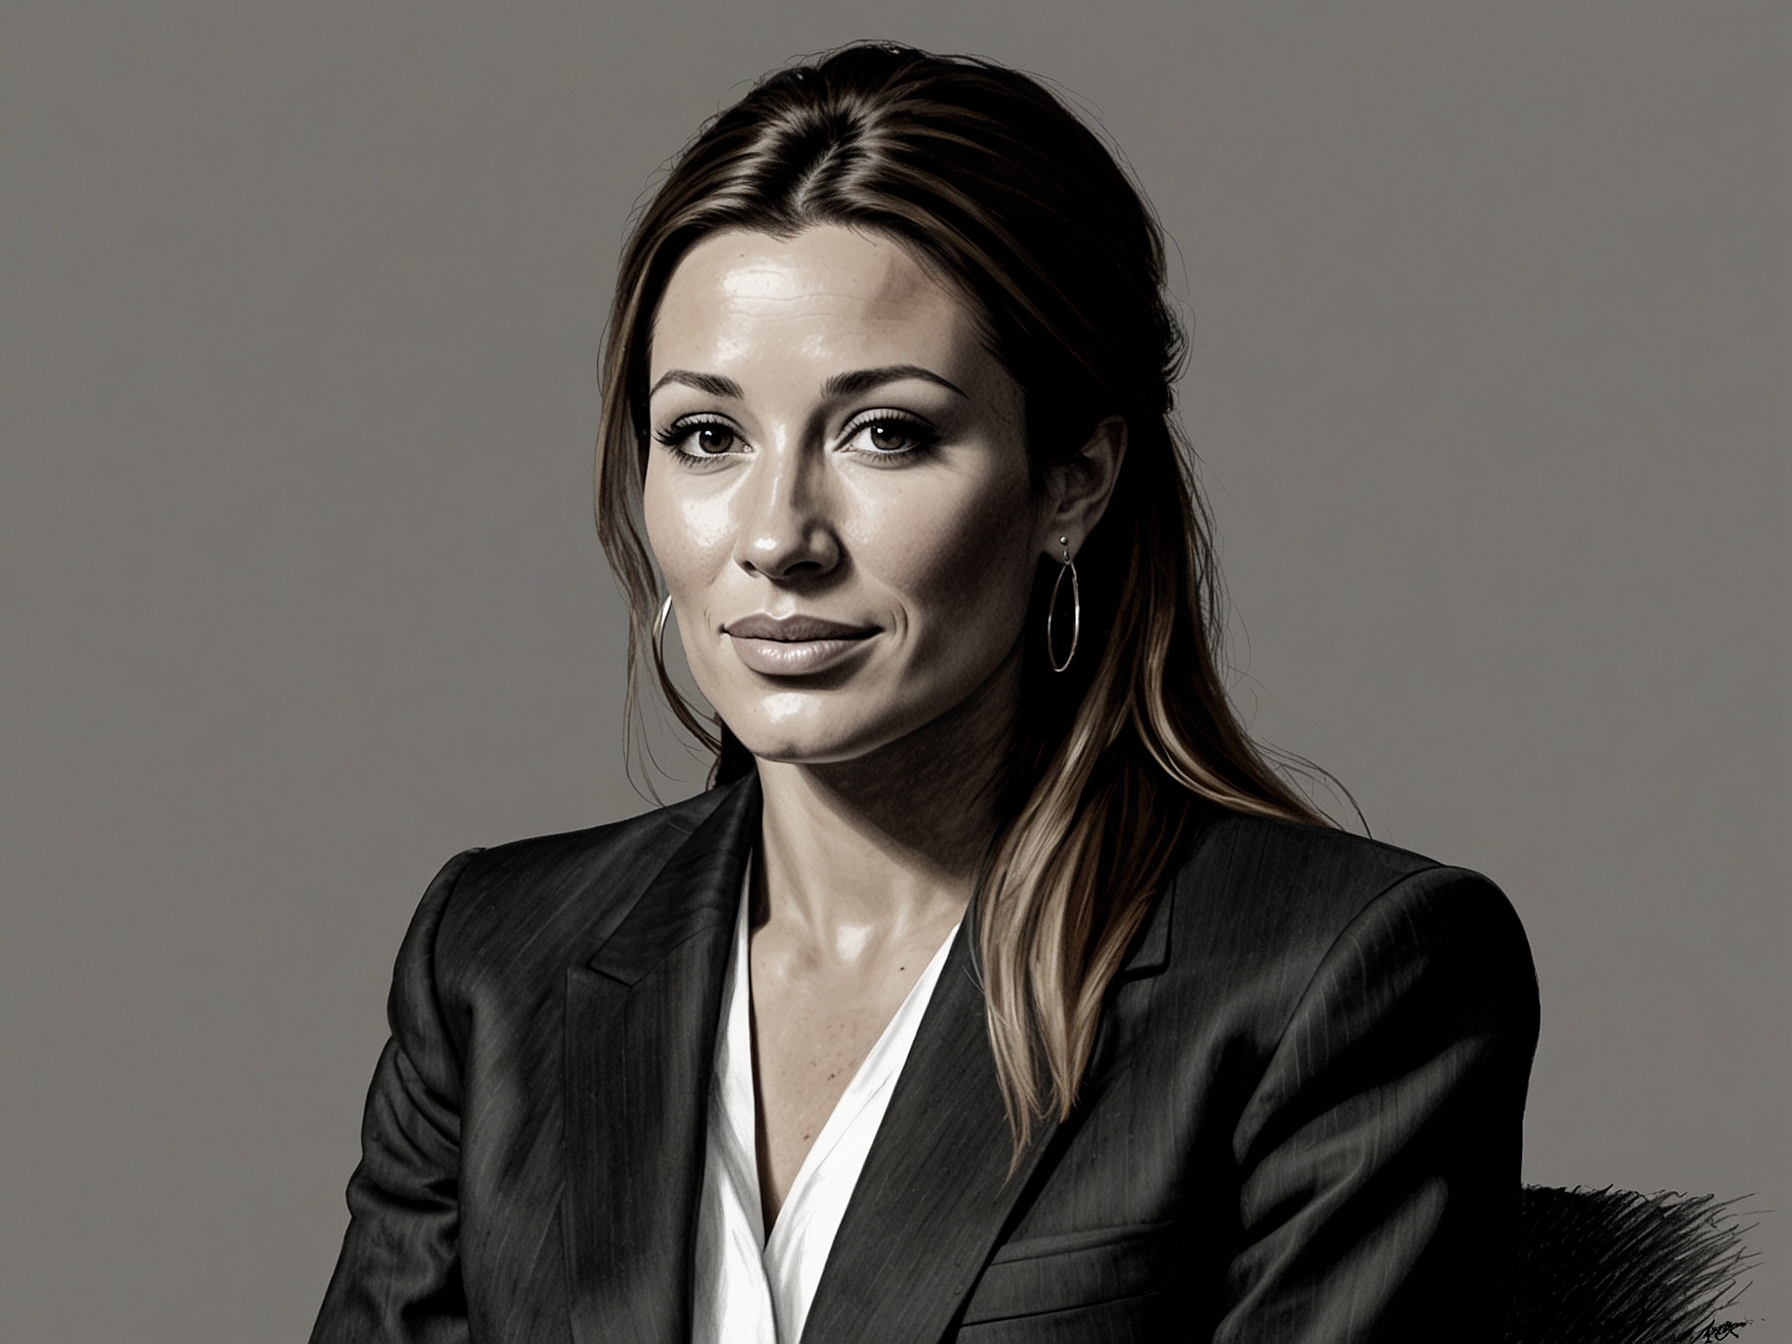 Rebecca Loos in an interview setting, discussing her professional relationship with David Beckham and the alleged affair that sent shockwaves through the media.